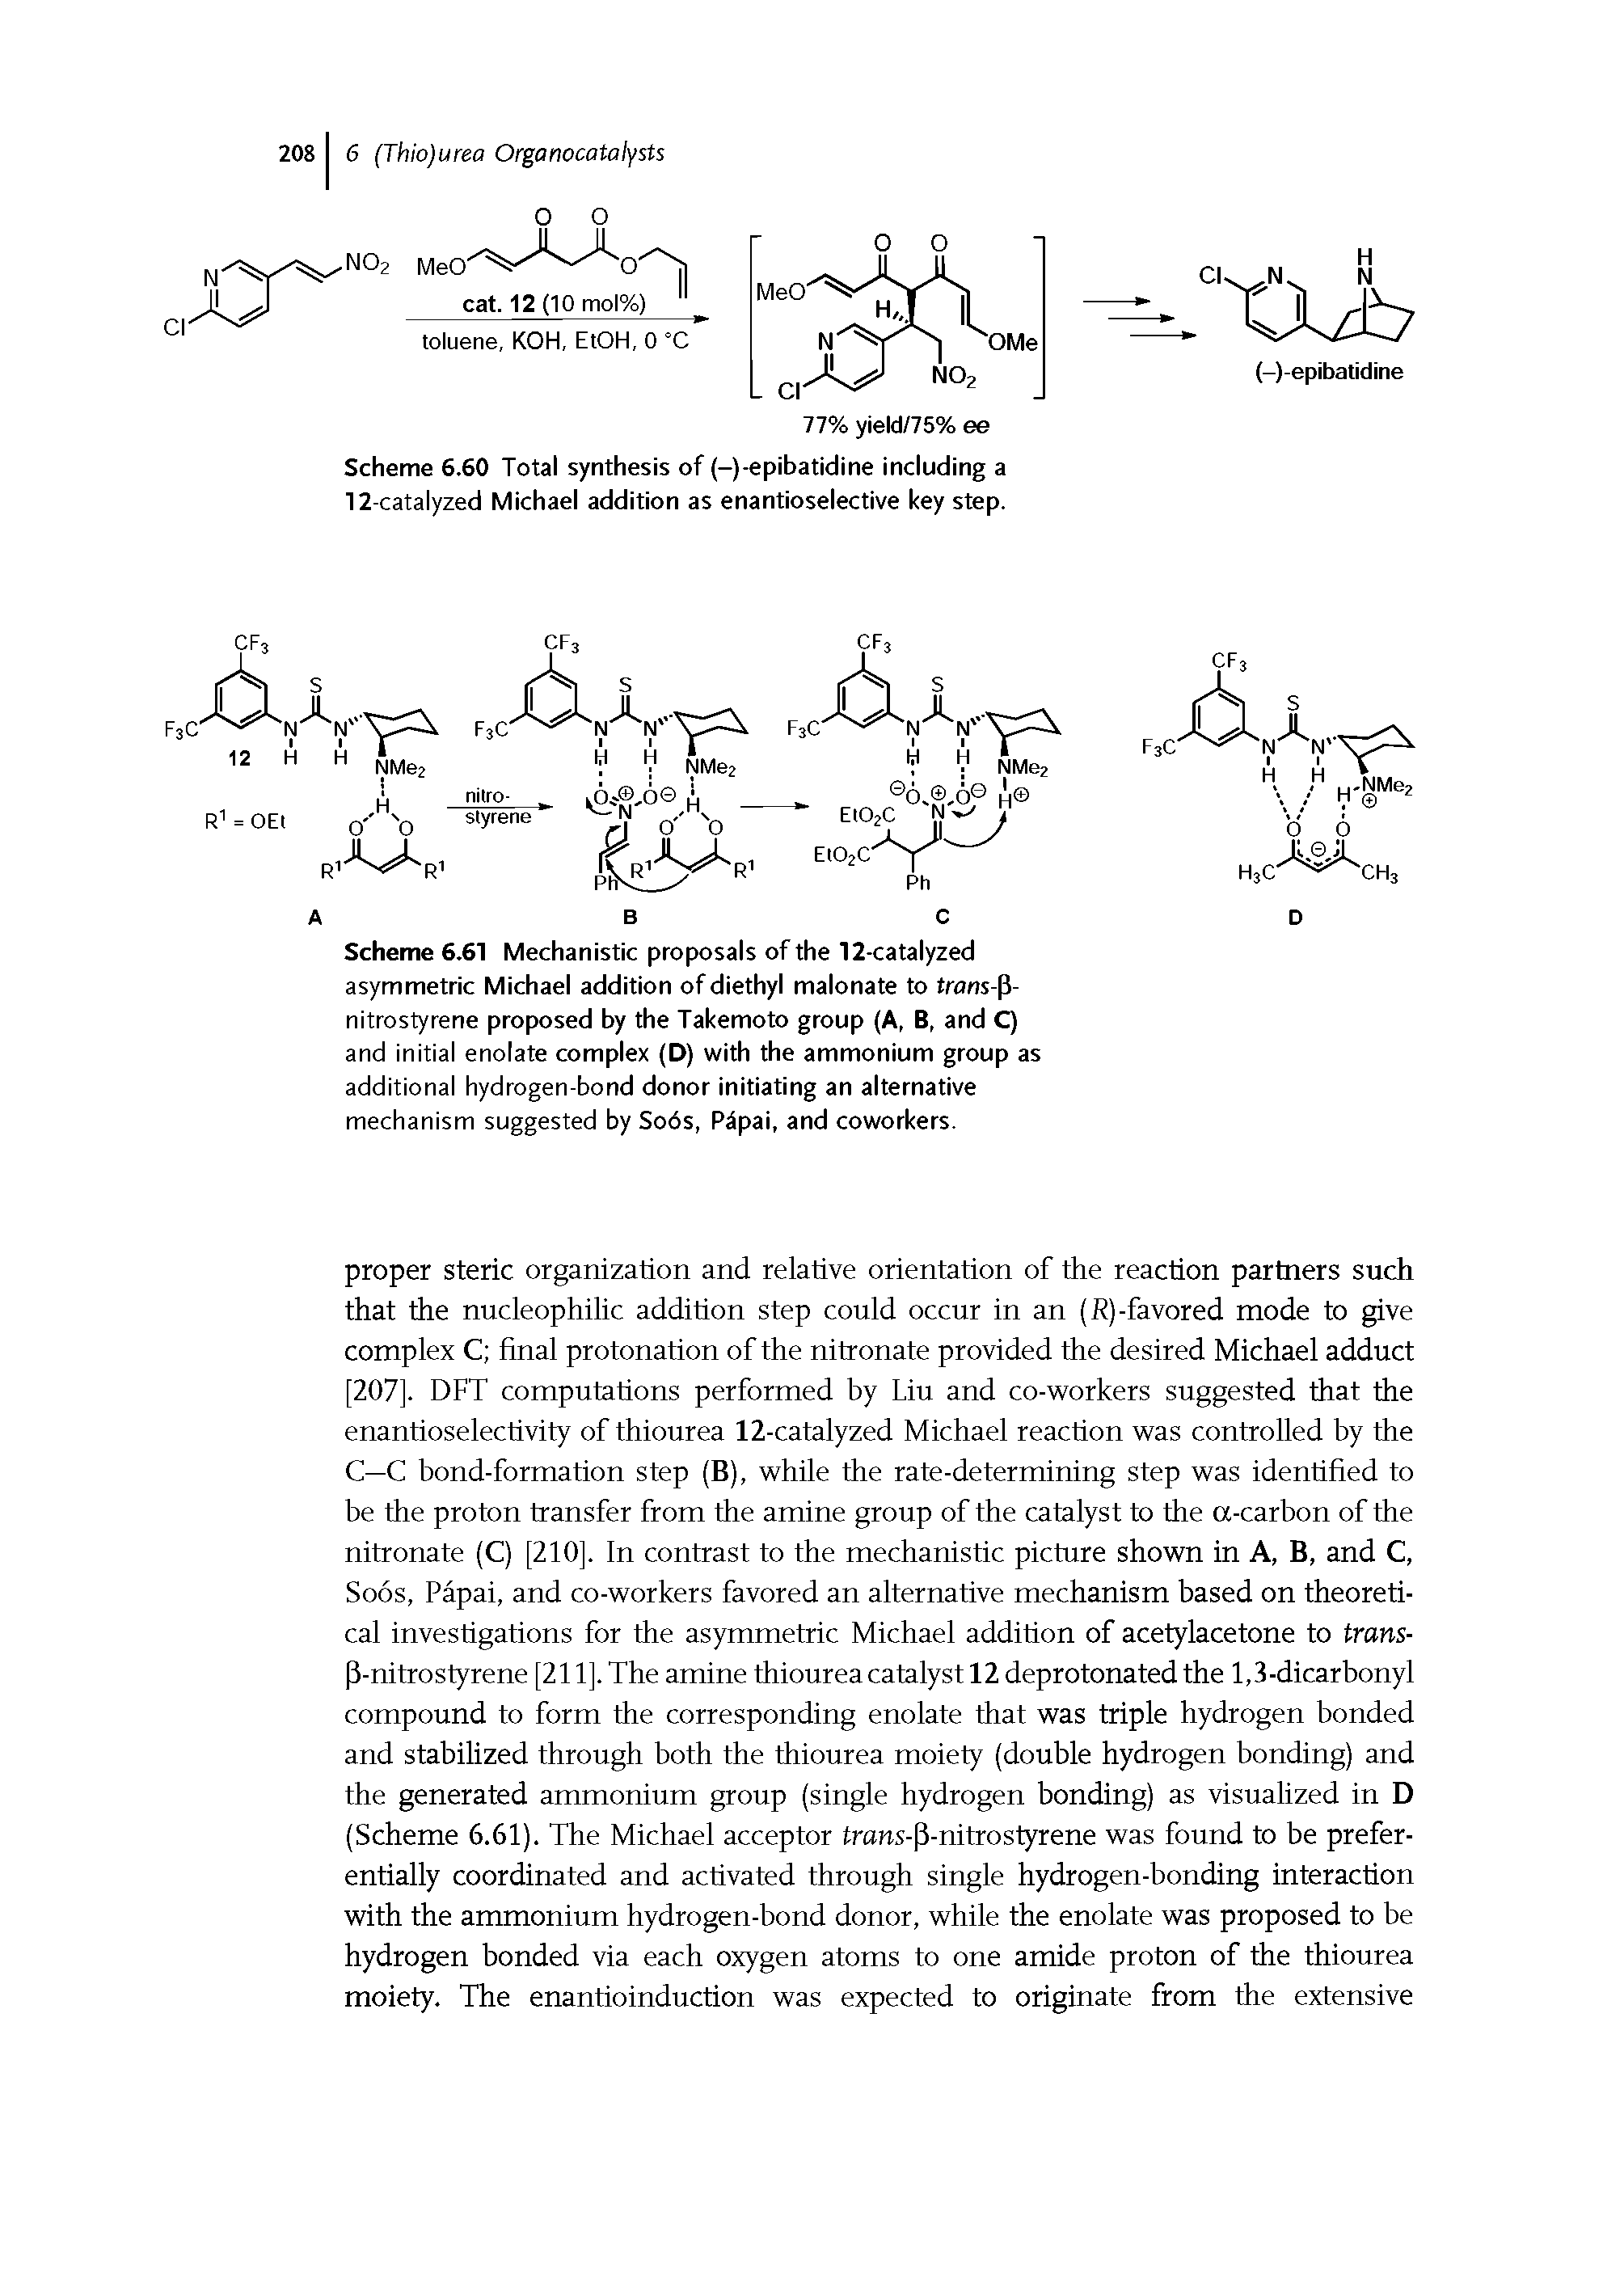 Scheme 6.60 Total synthesis of (-)-epibatidine including a 12-catalyzed Michael addition as enantioselective key step.